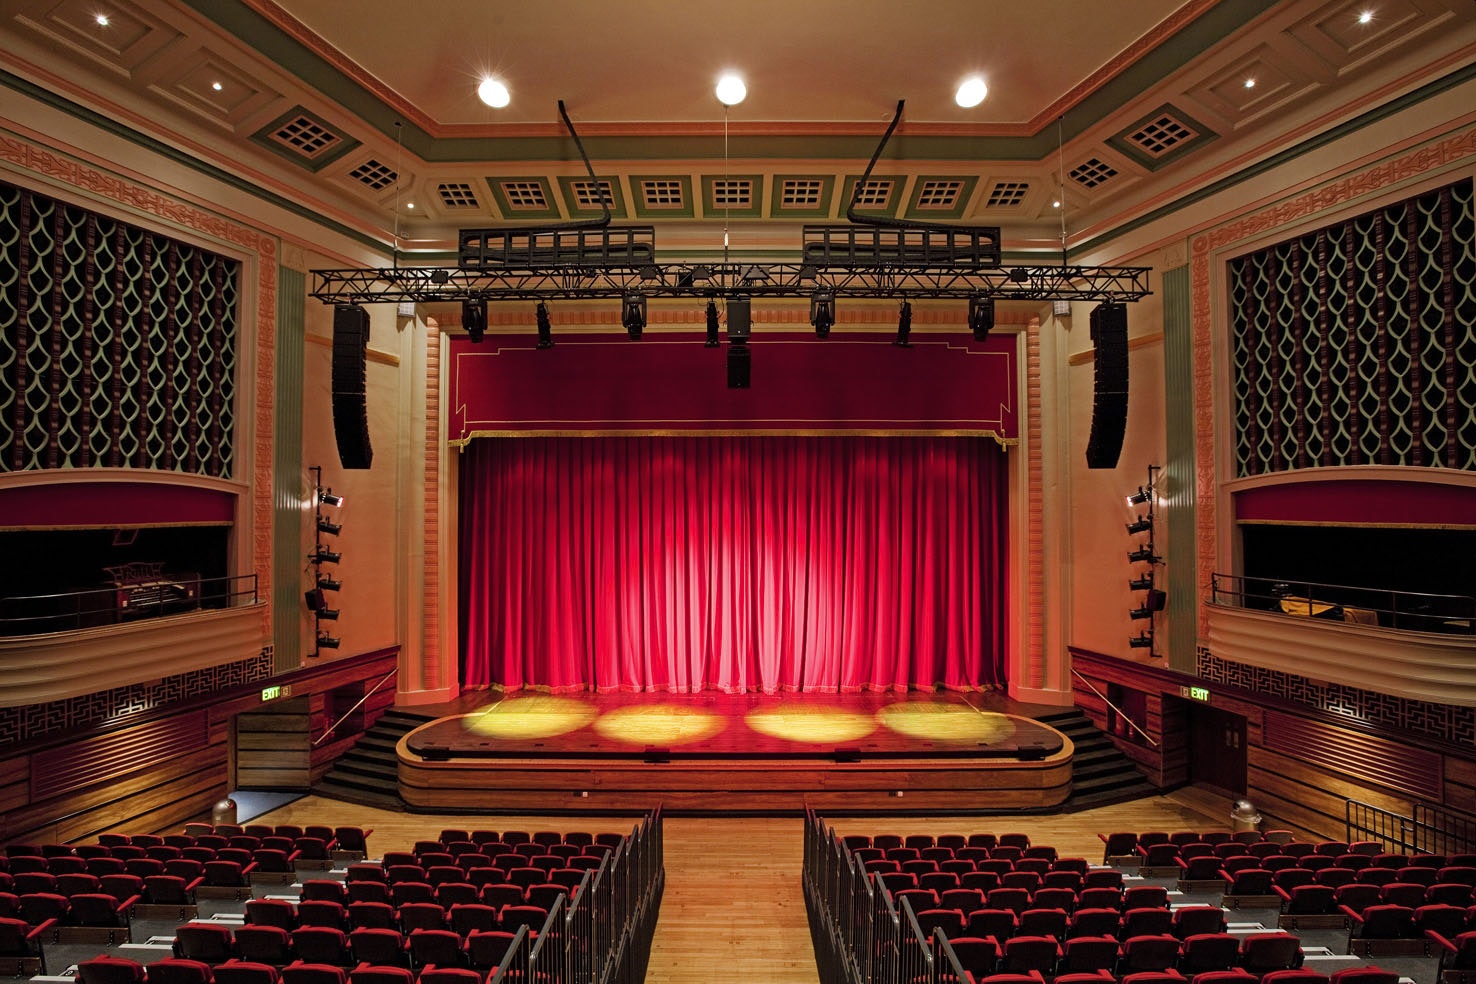 The People's Palace - Queen Mary Venues - The Great Hall Theatre image 5